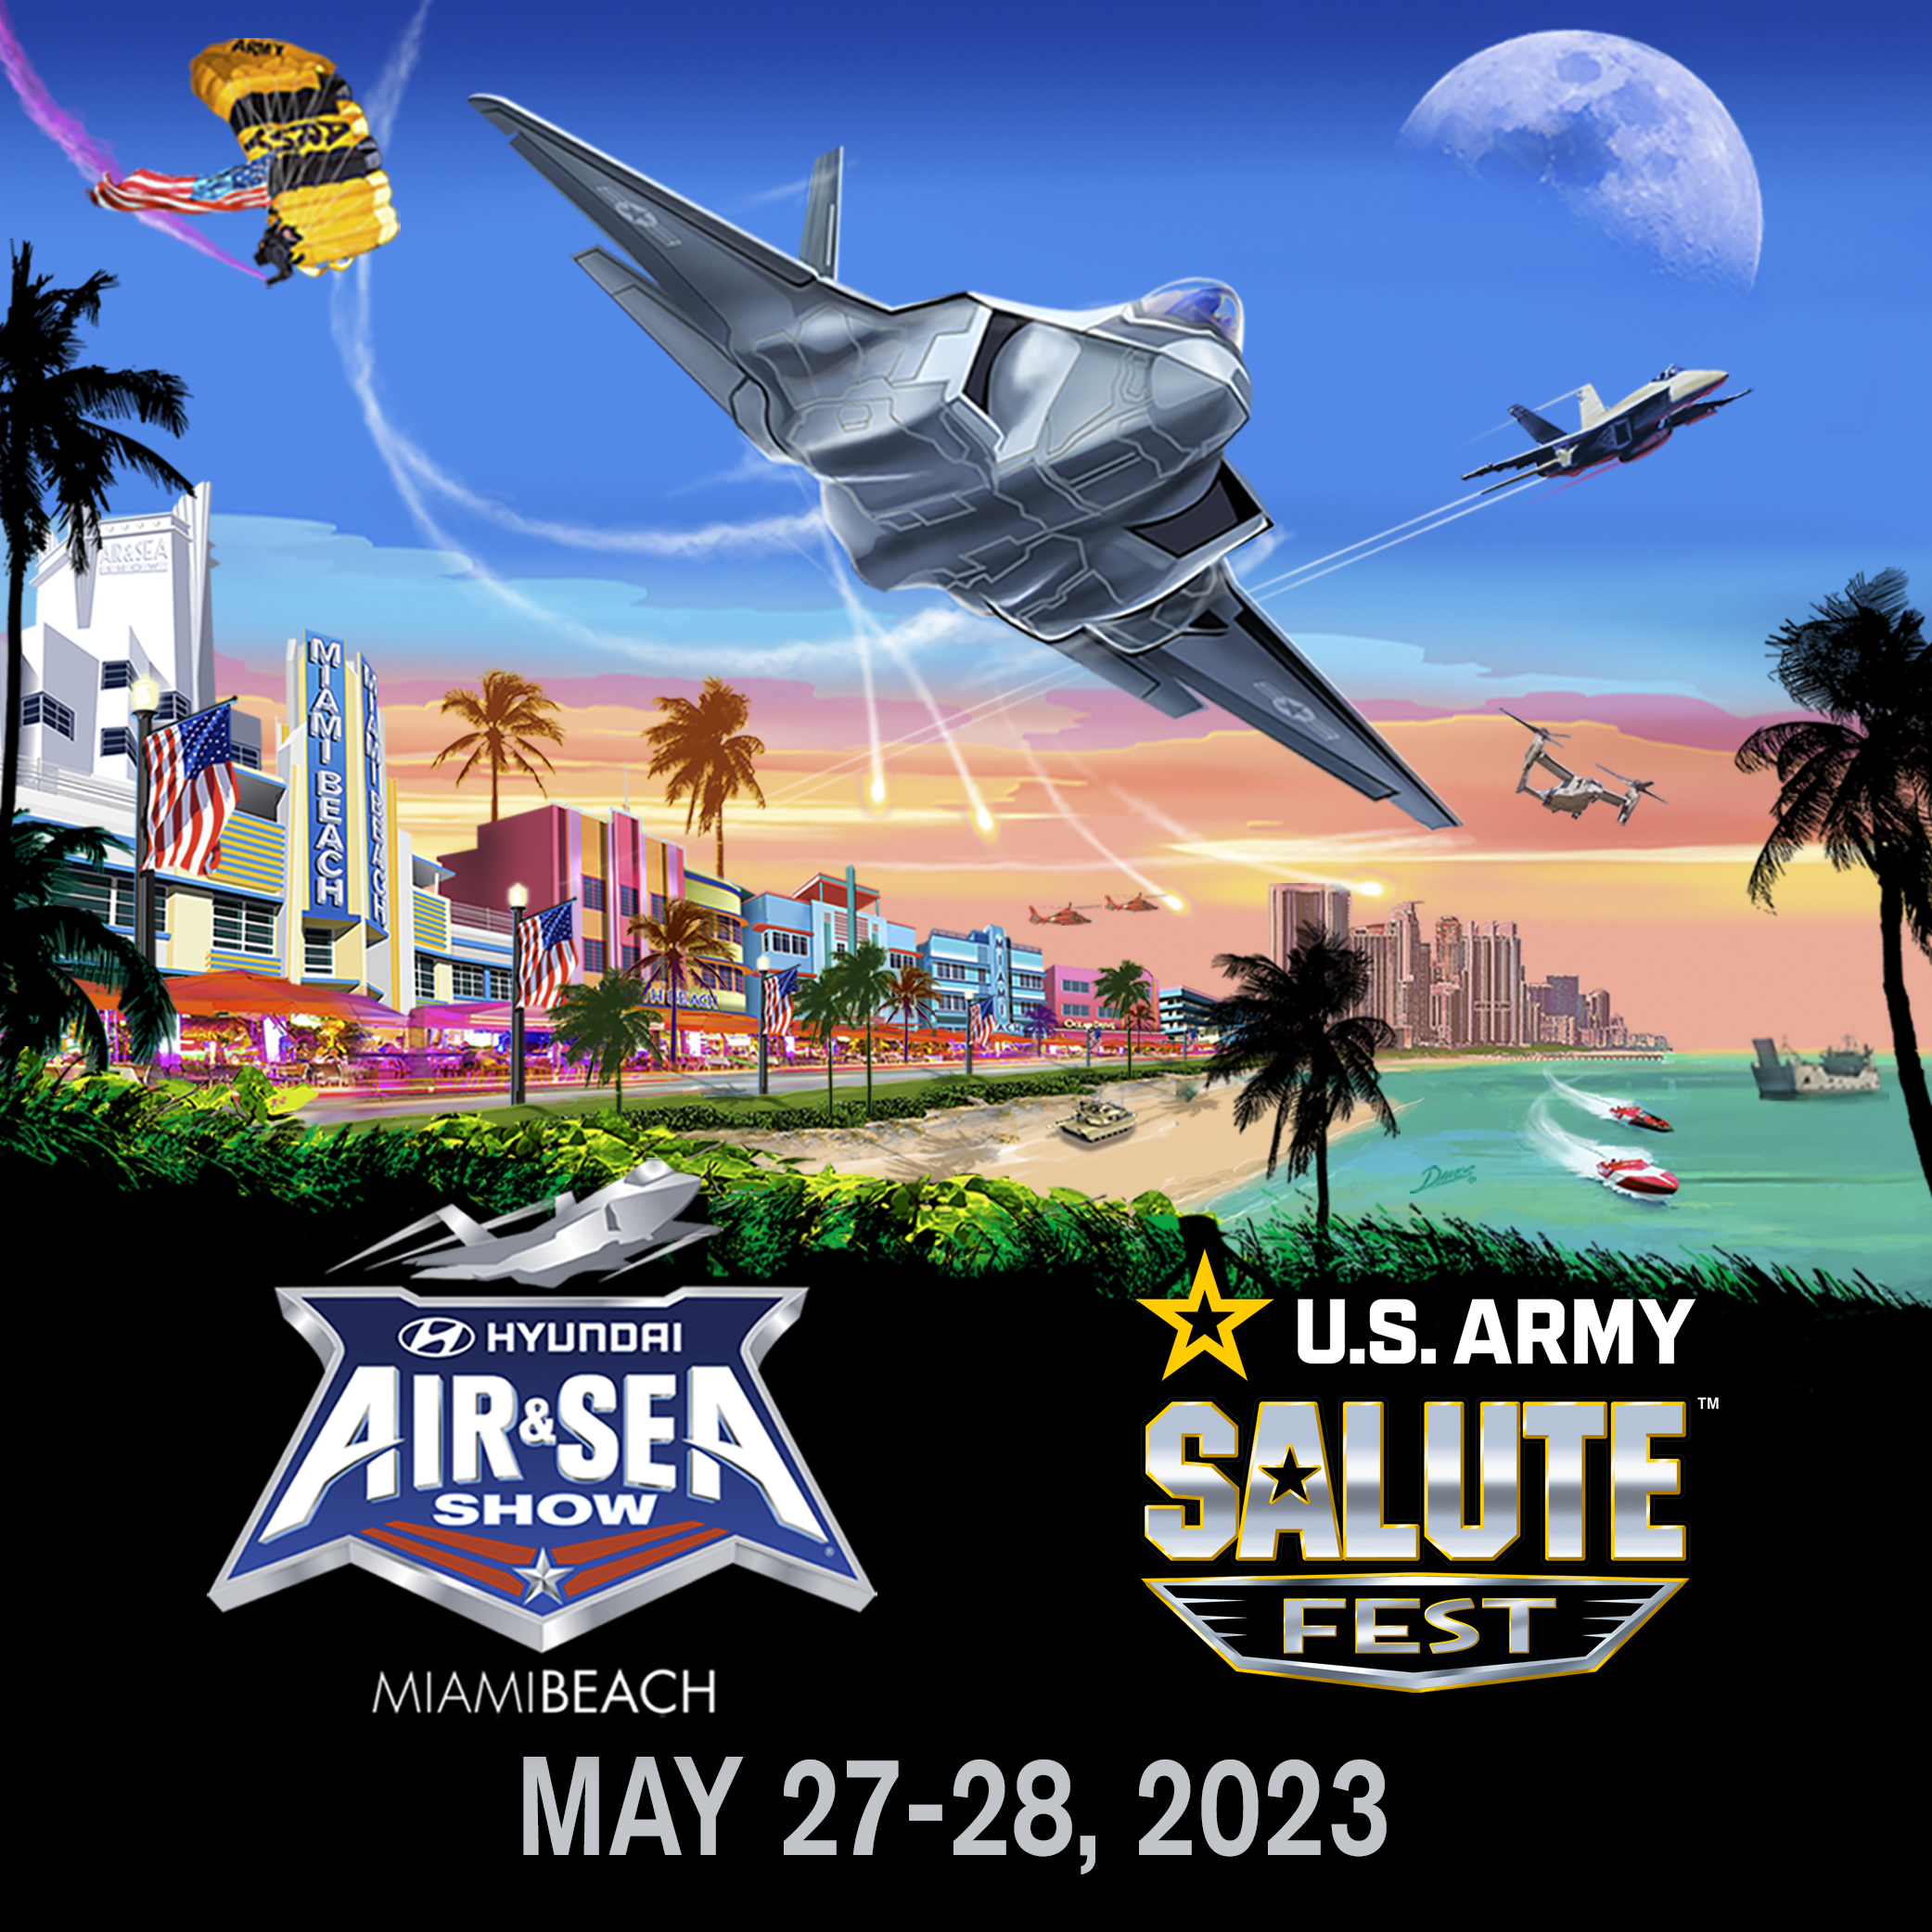 Buy Tickets to The Hyundai Air & Sea Show & U.S. Army SaluteFest in